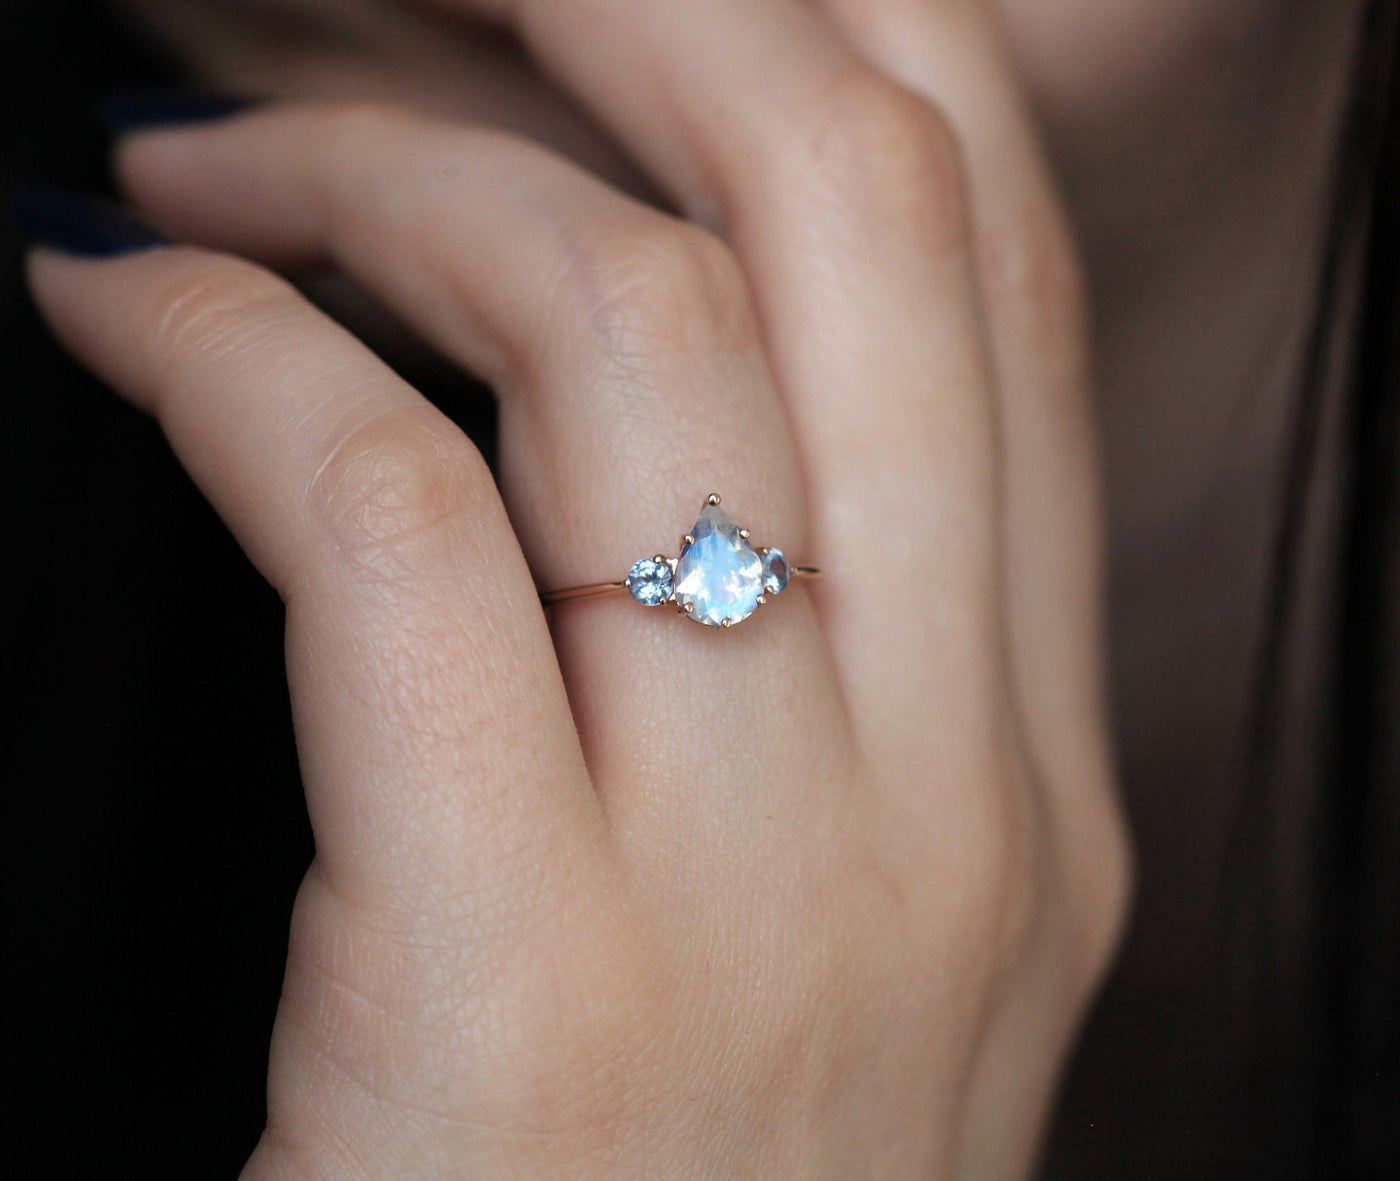 Pear-shaped white moonstone ring with side sapphires